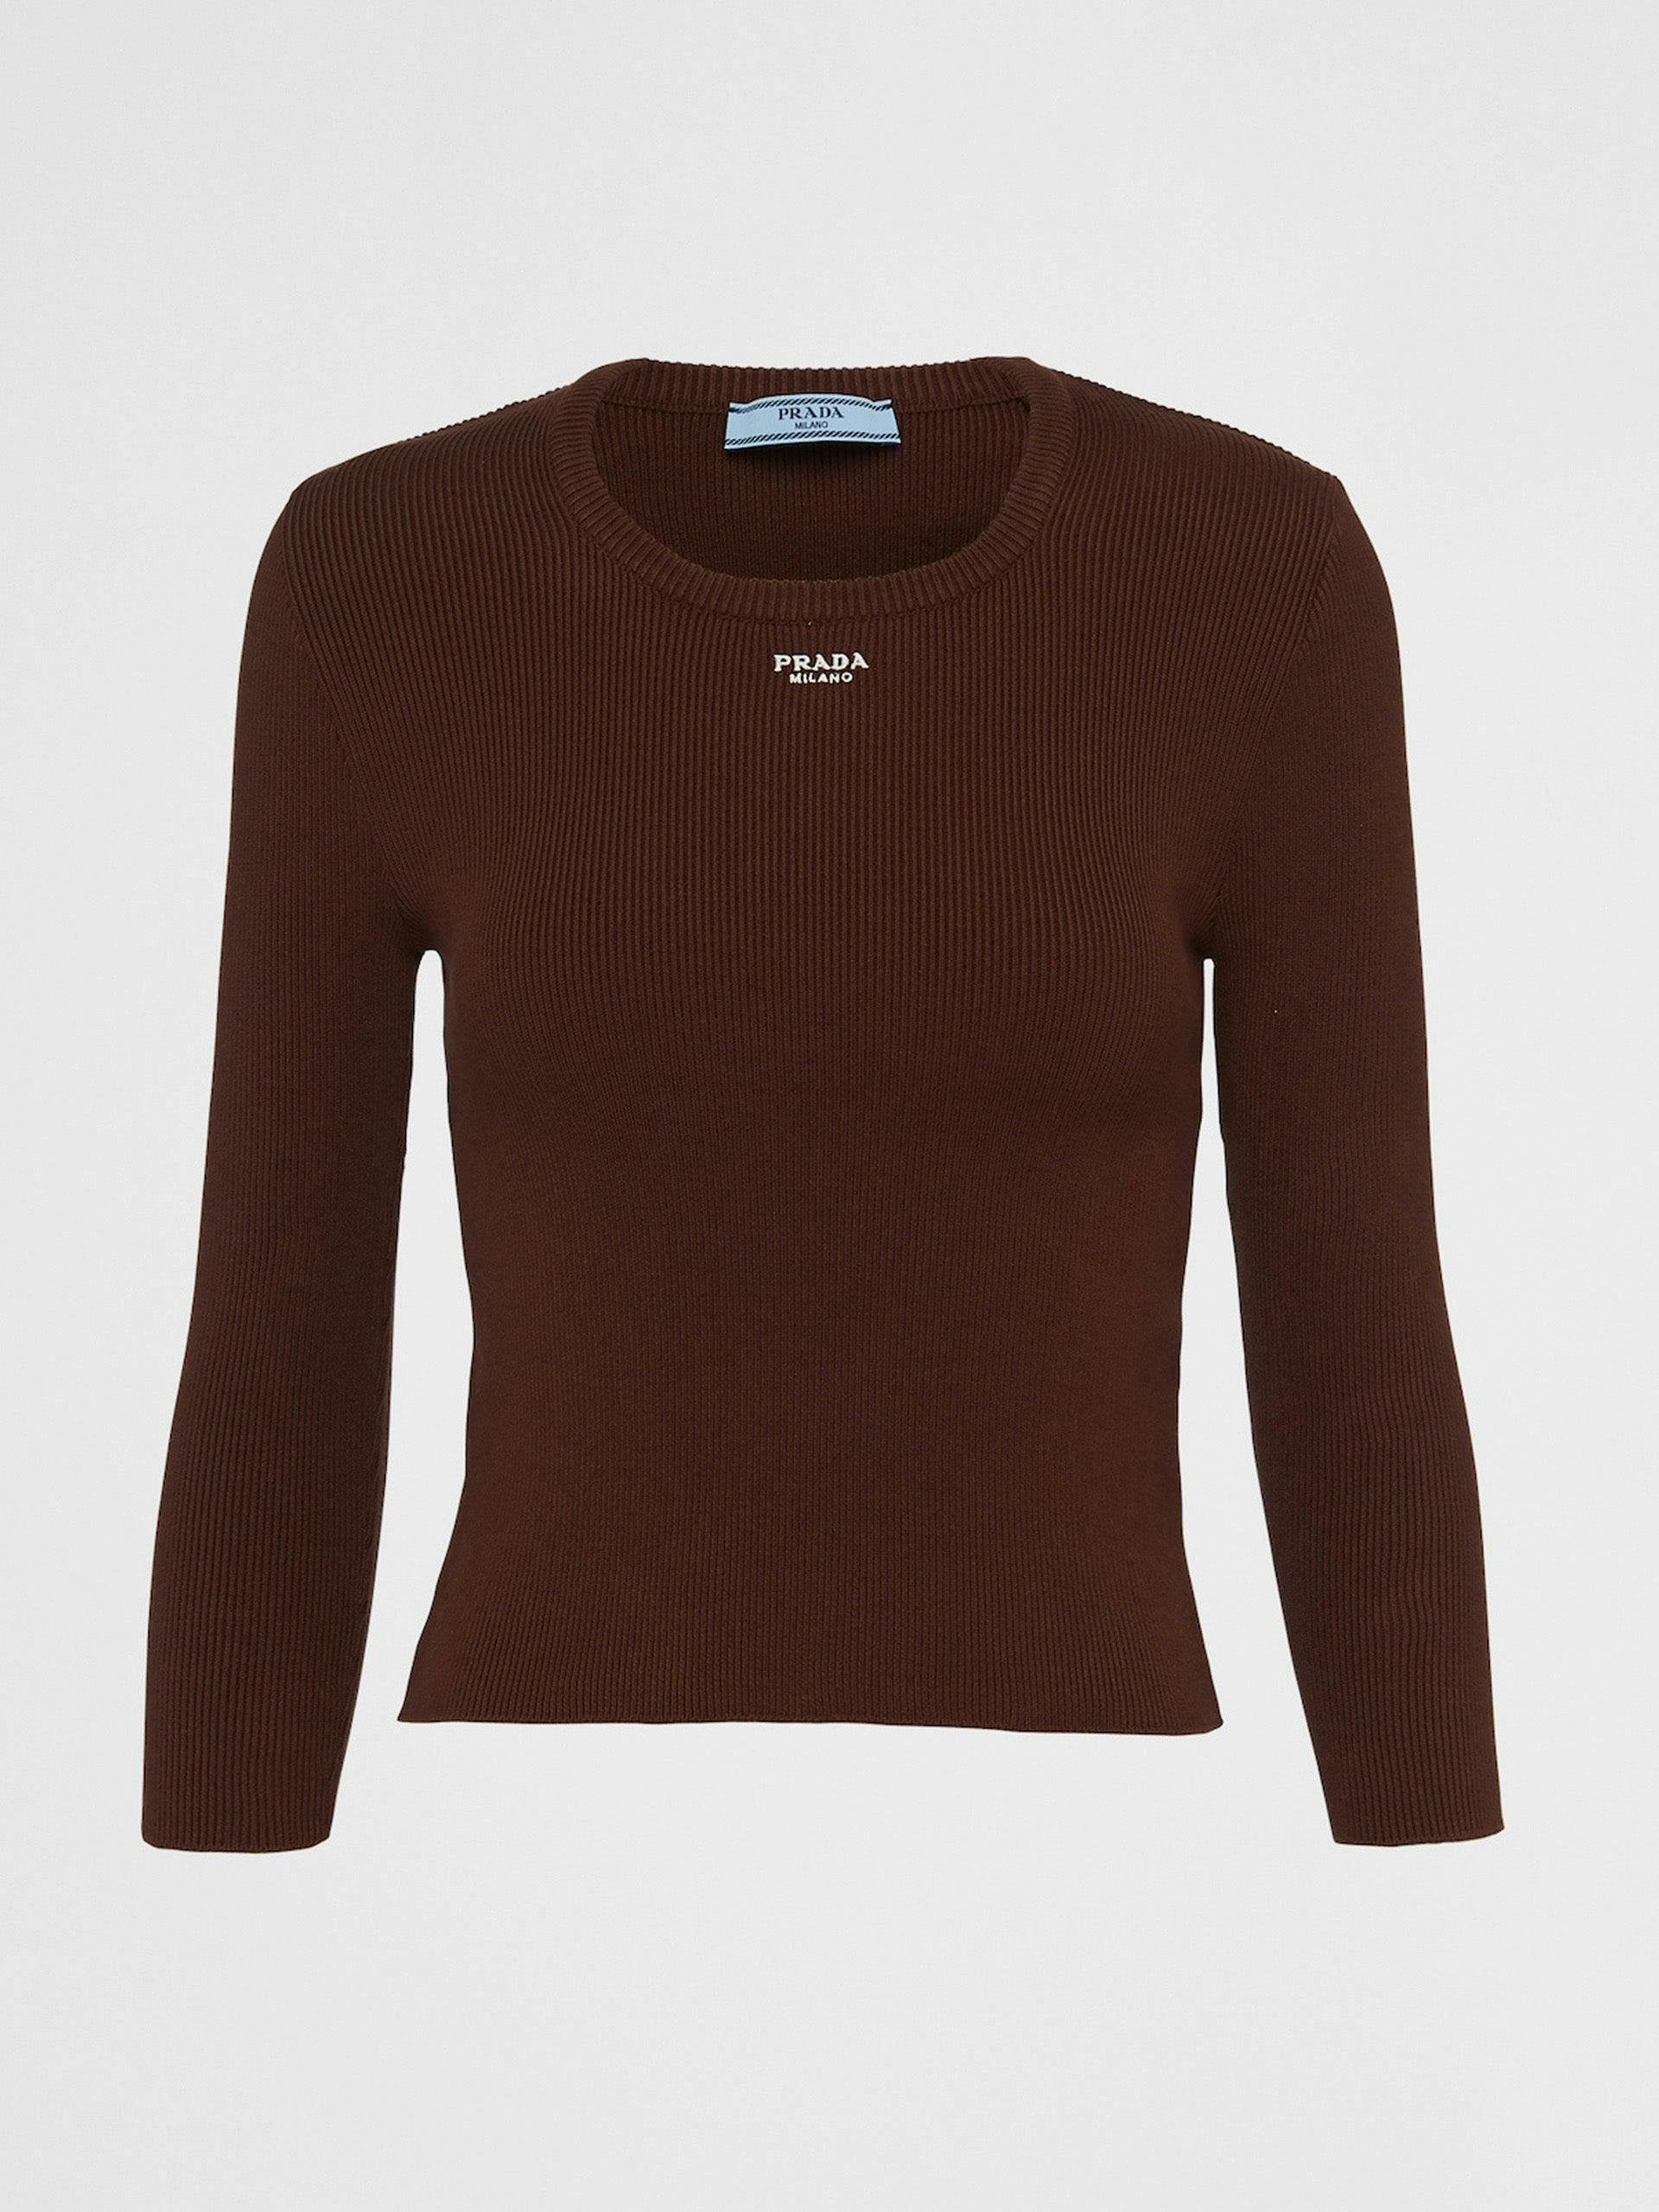 3/4 sleeve brown cotton sweater